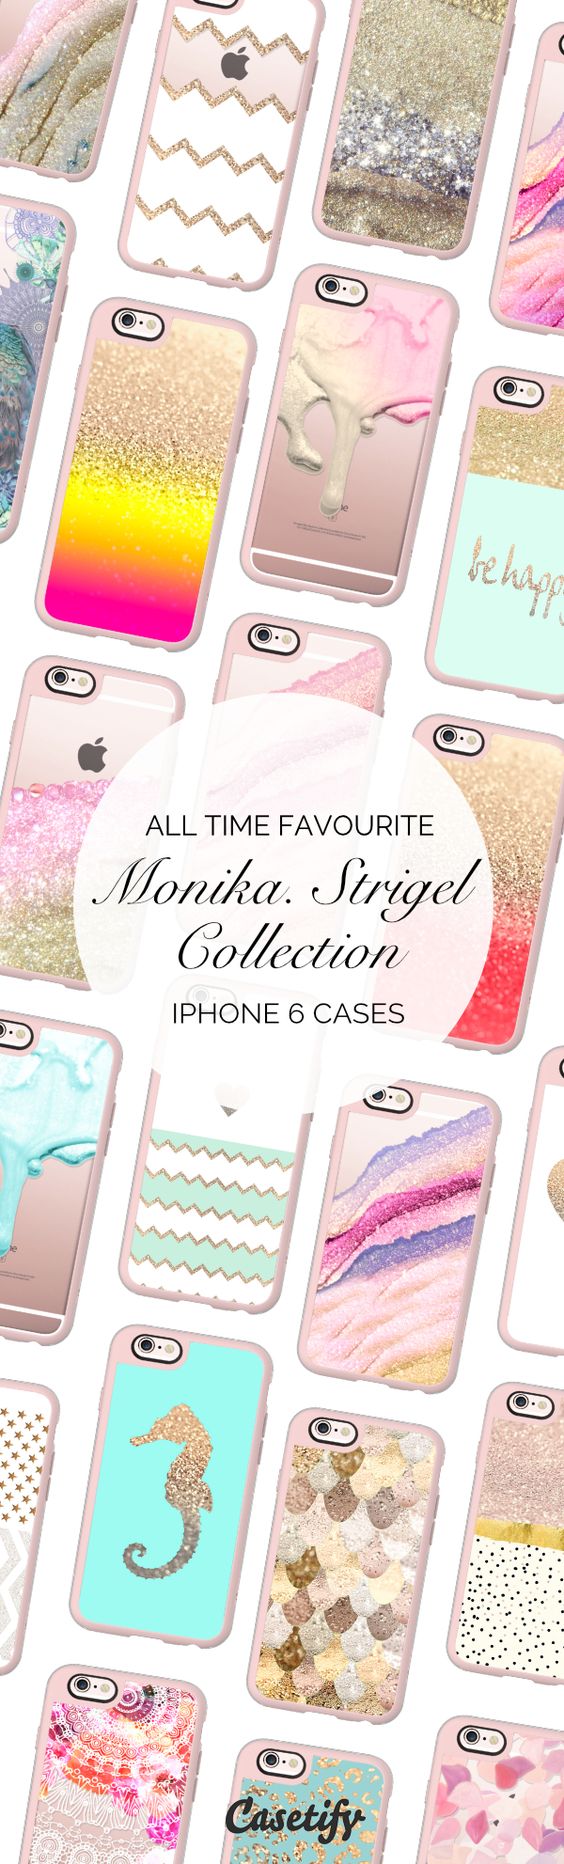 All time favourite iPhone 6 protective phone case designs by Monika Strigel | Click through to see more iphone phone case ideas   | @Casetify